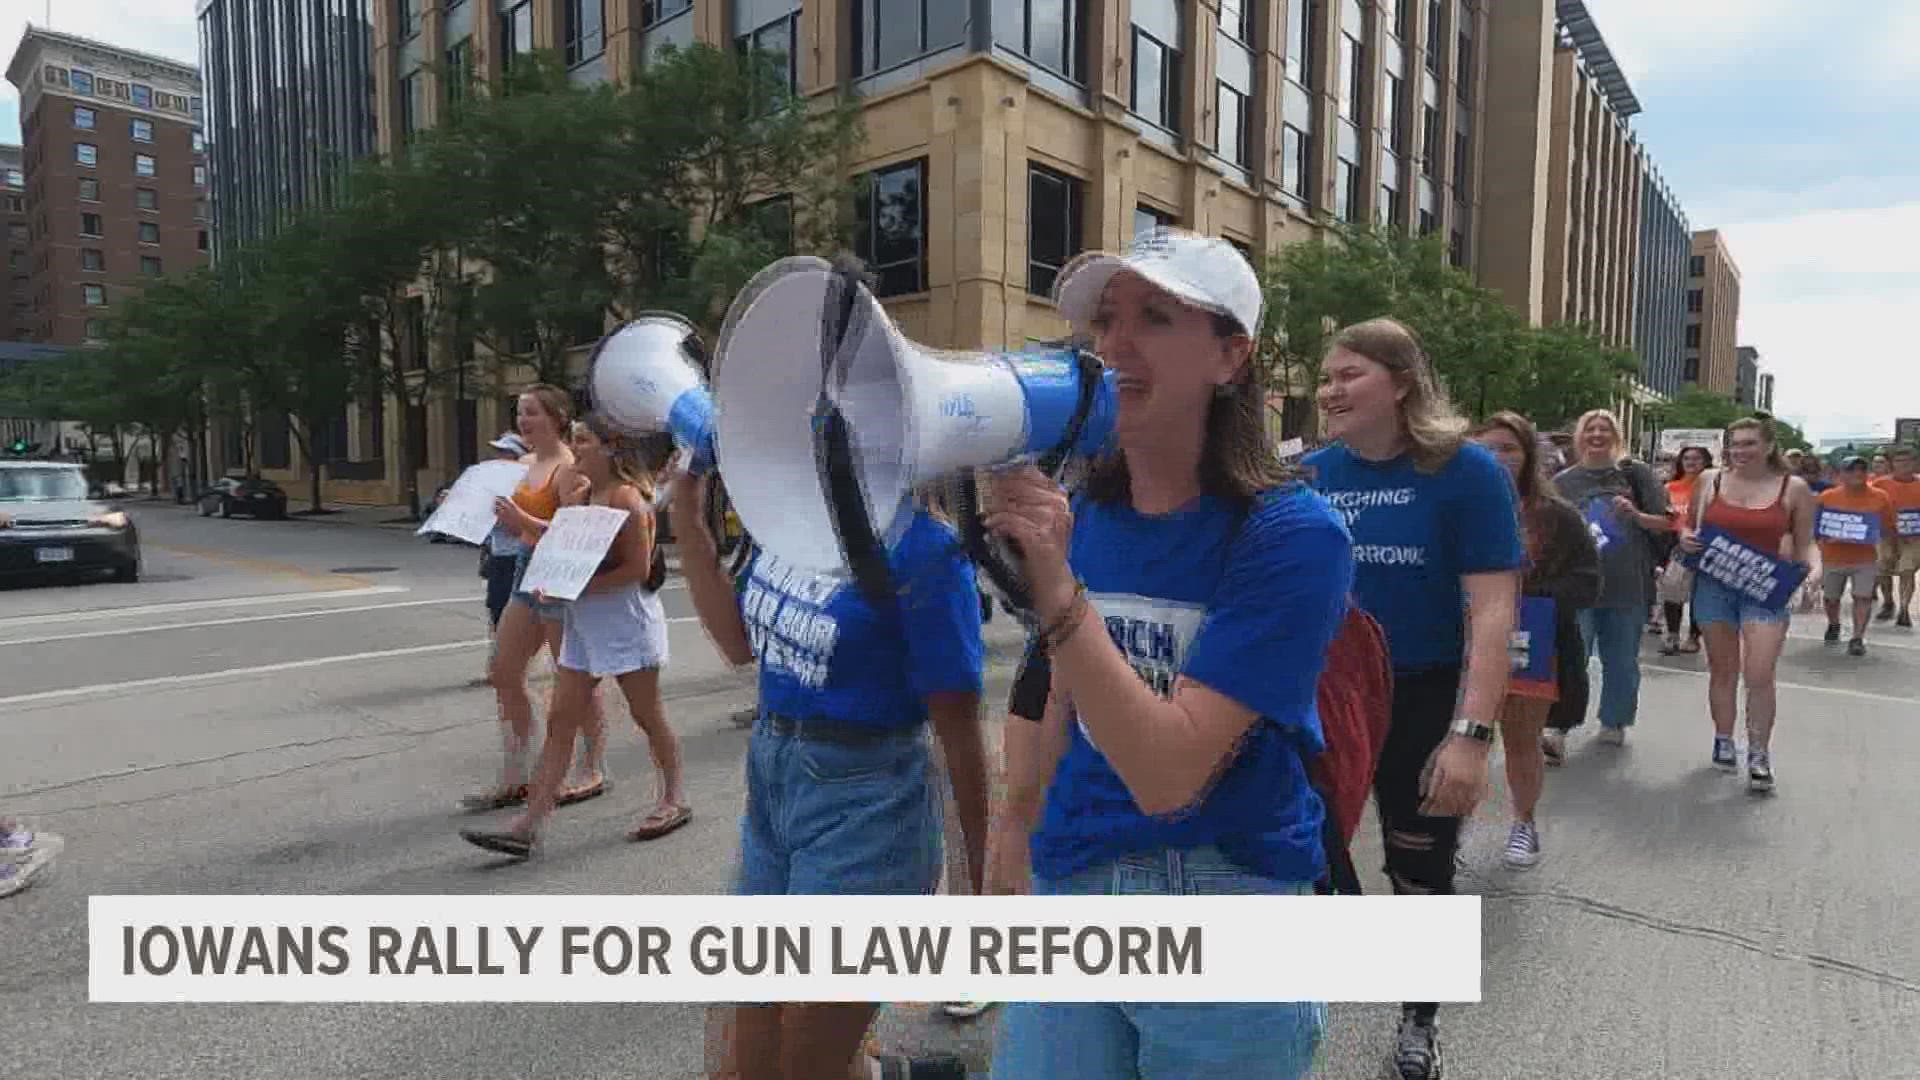 Nearly 150 people marched in downtown Des Moines calling for action from the Iowa legislature, but their demands face opposition.